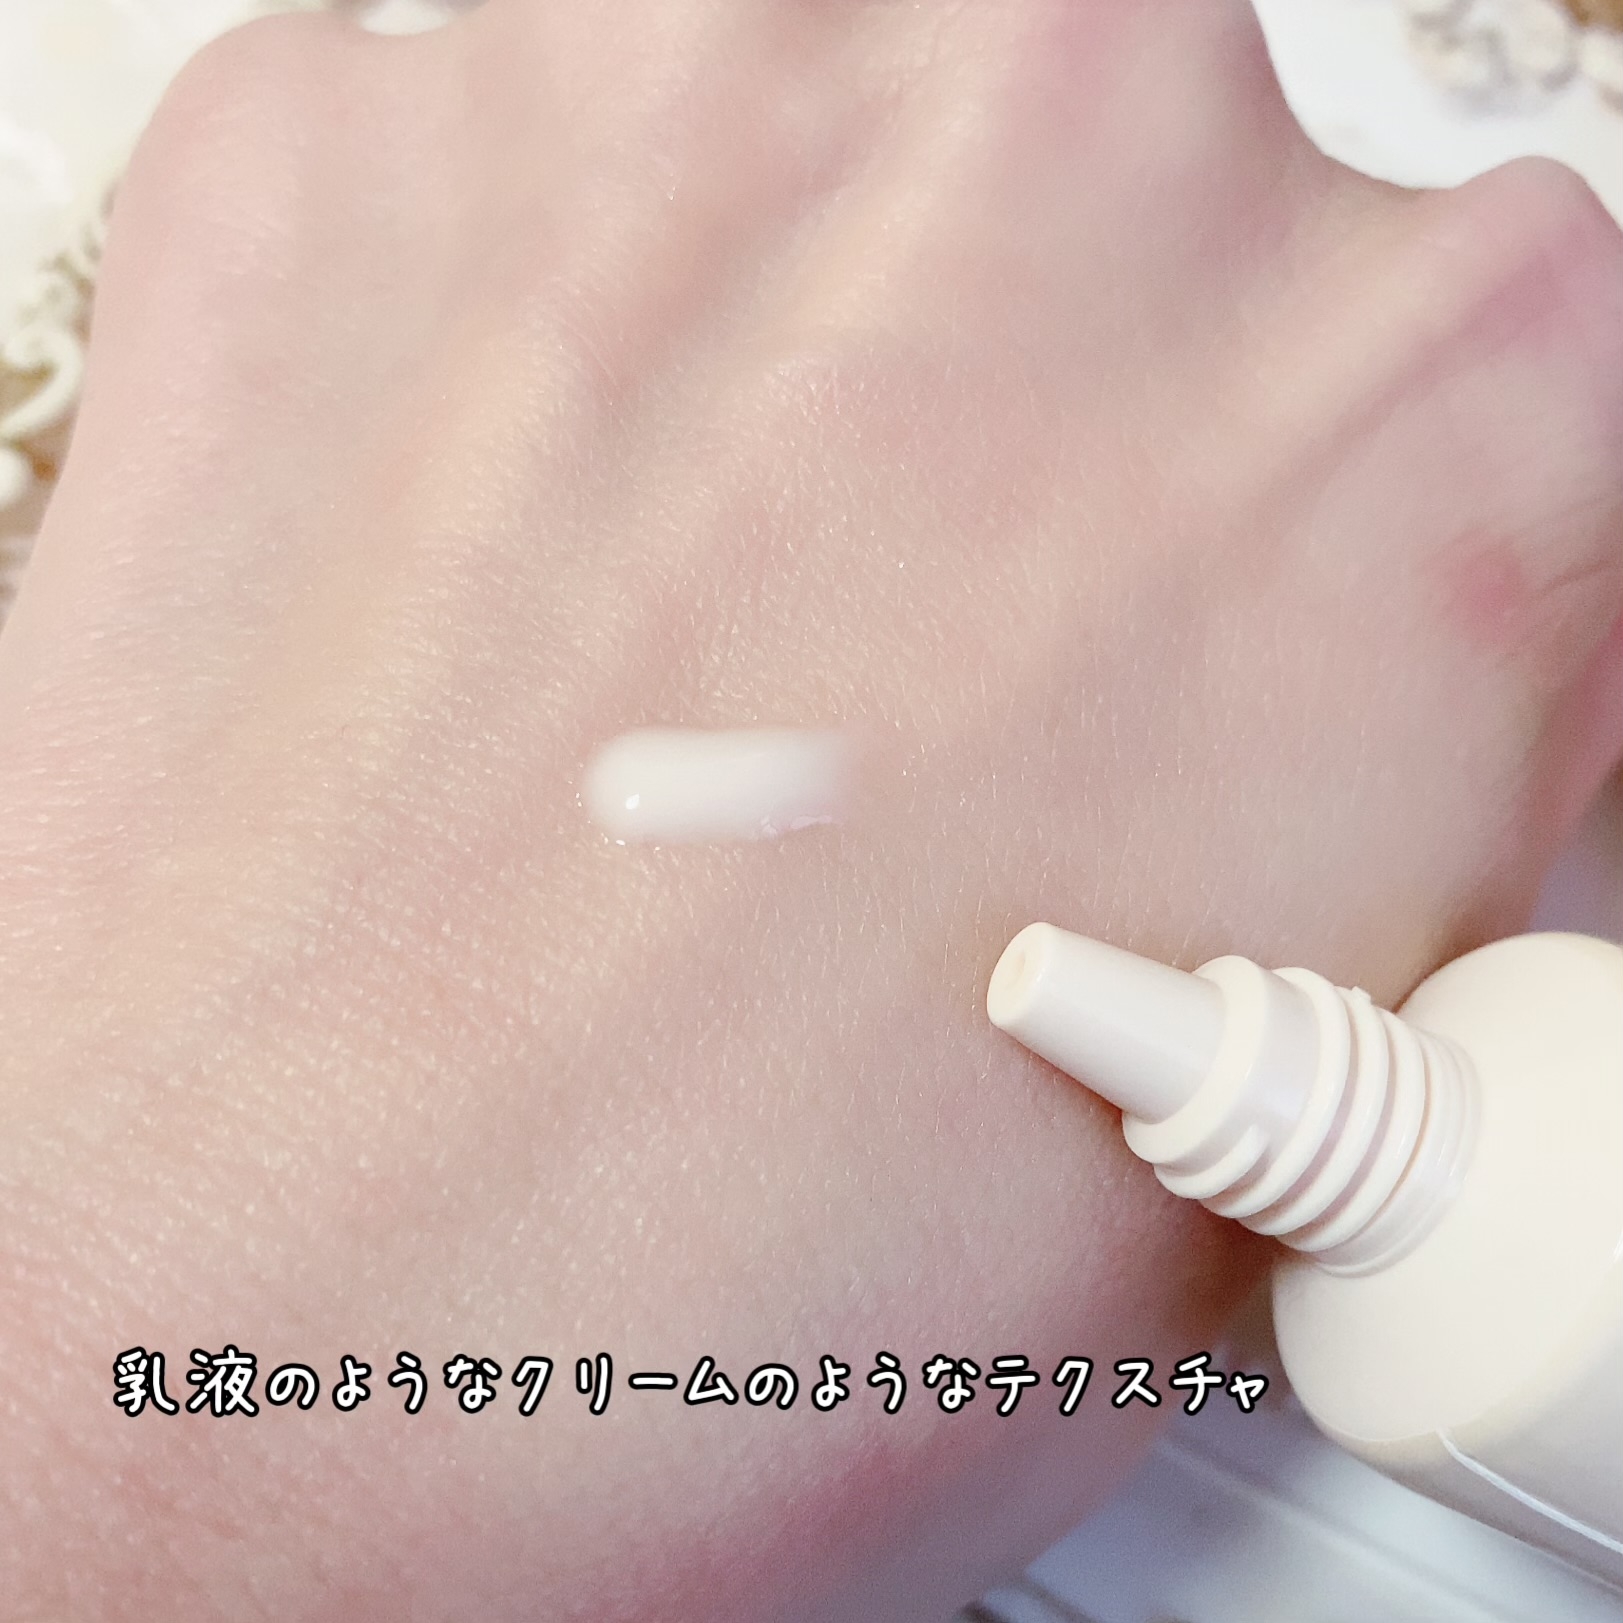 MAYBENA Perfect Lifting Protein Cream Ampoule 73を使った珈琲豆♡さんのクチコミ画像3